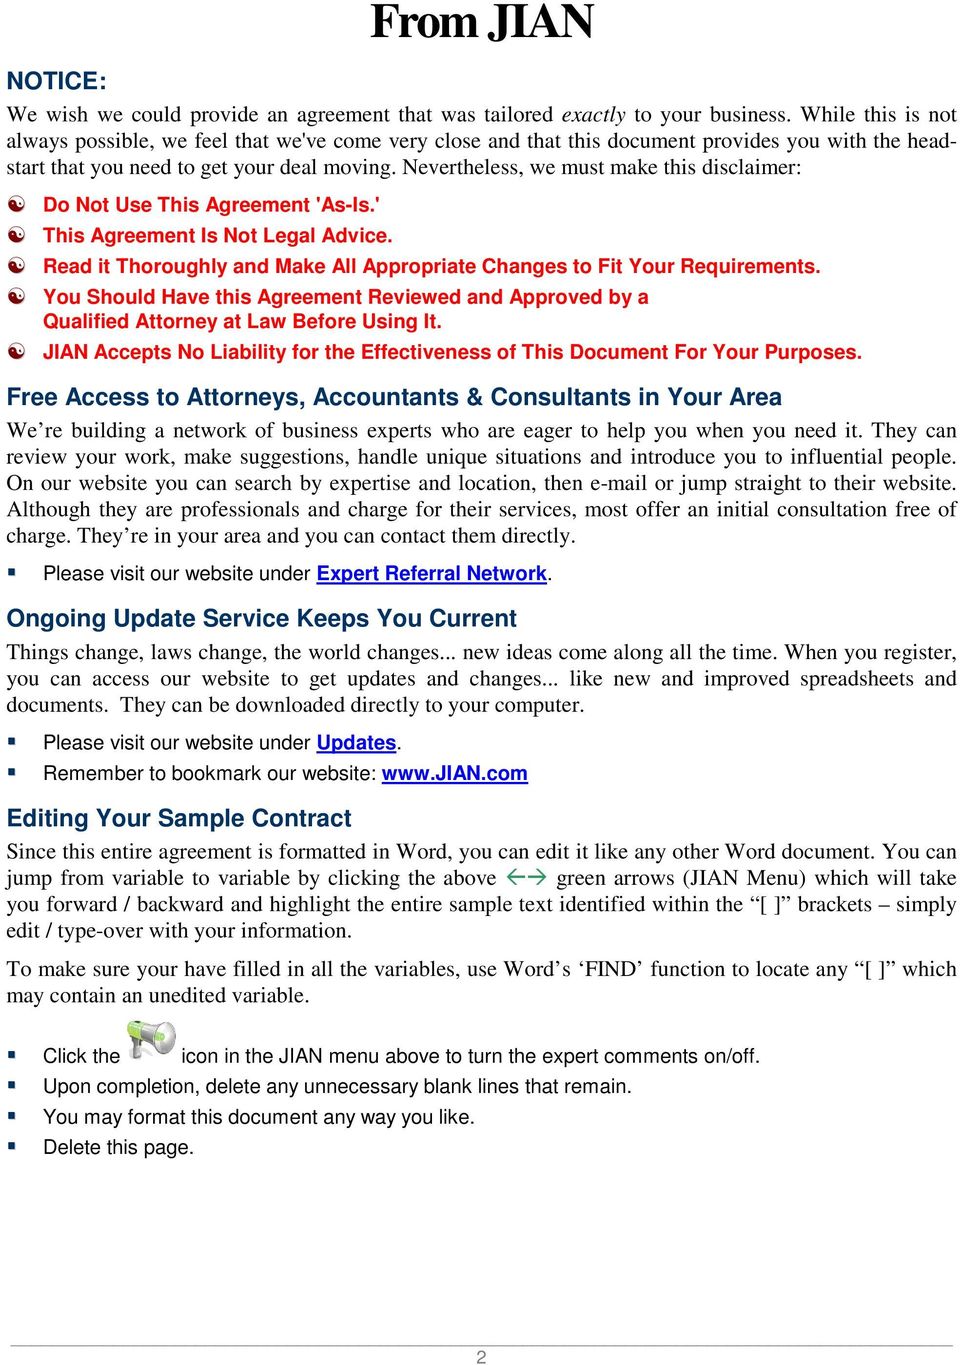 Salesperson Agreement Commission Only Pdf Free Download